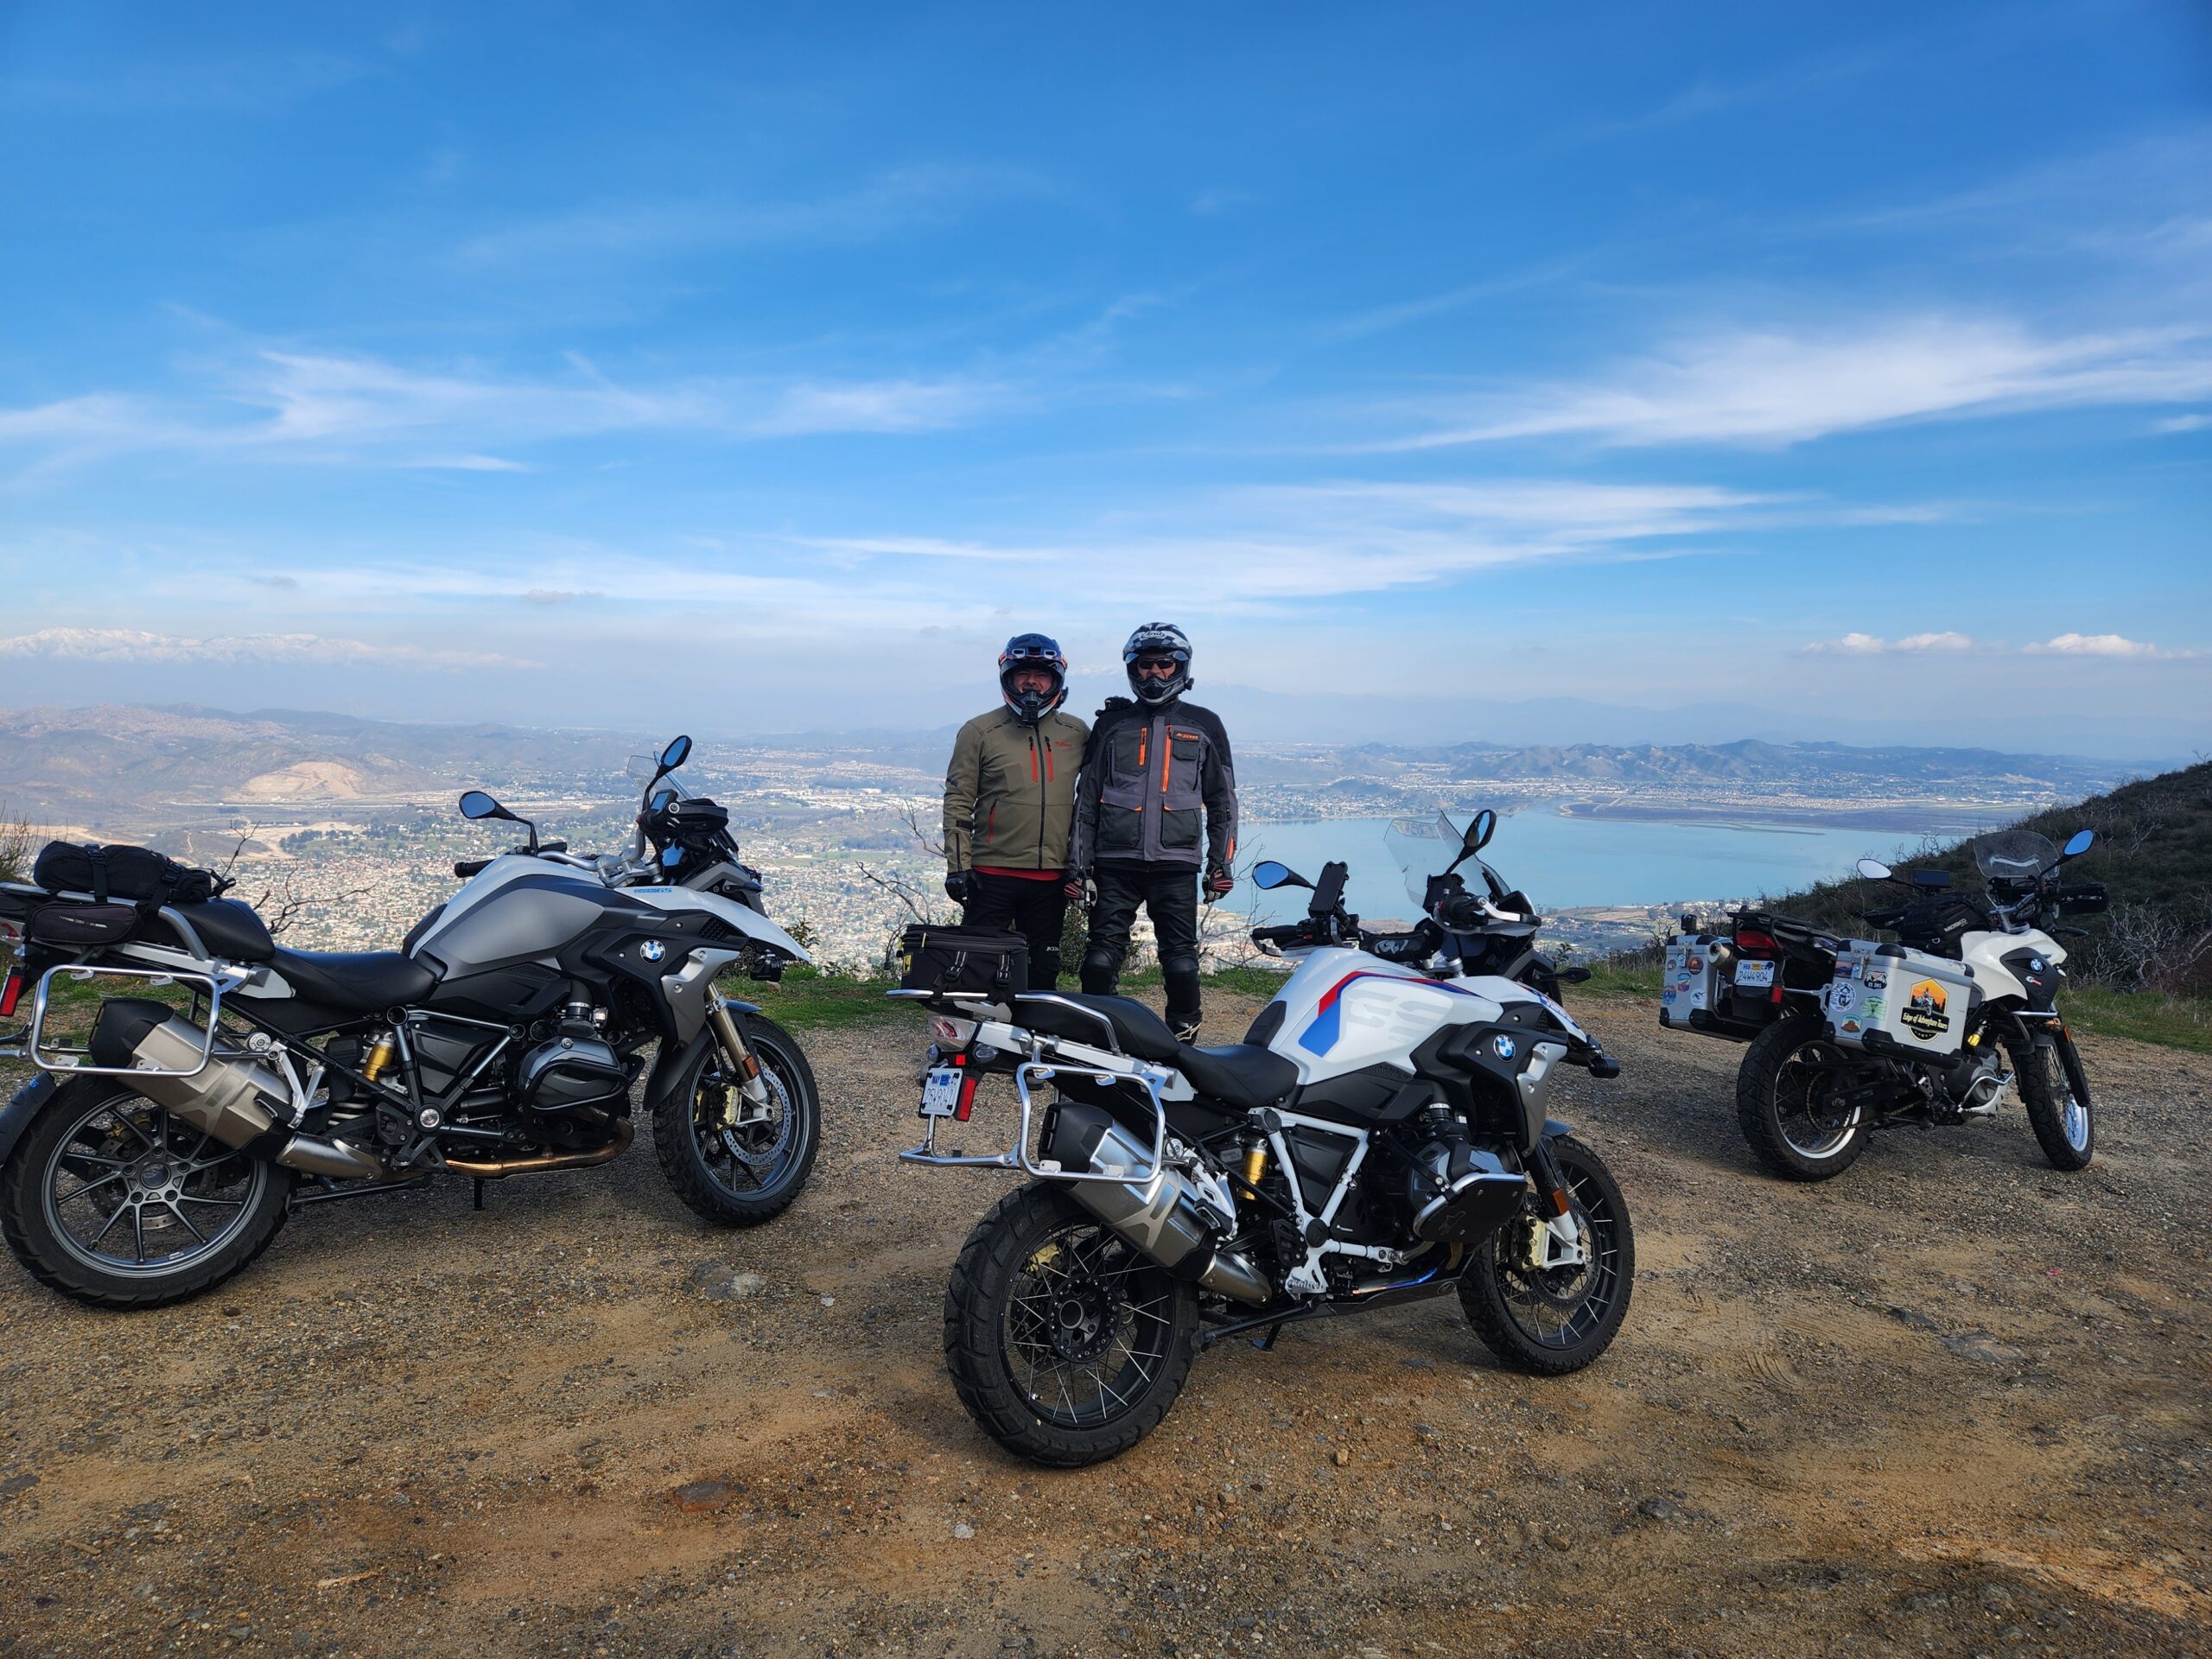 Two motorcycle riders stand on top of a mountain with 3 motorcycles in the foreground, with a lake in the background